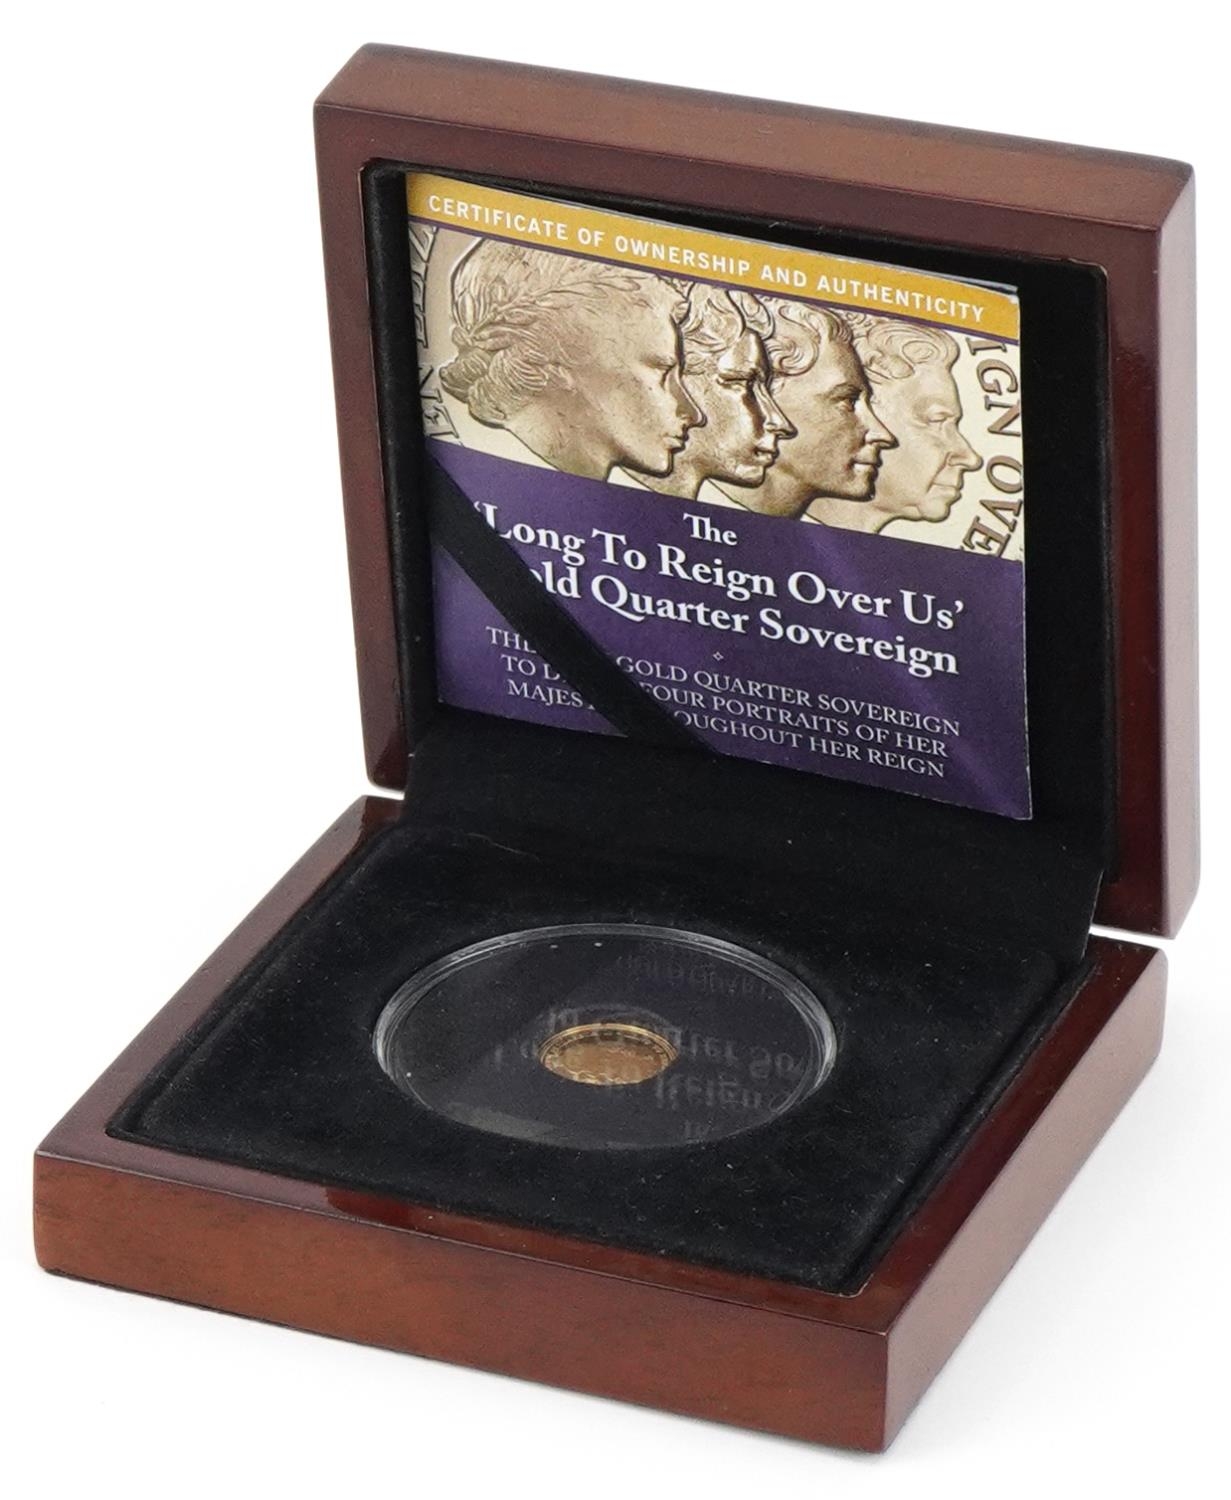 Elizabeth II 2015 Long to Reign Over Us gold quarter sovereign by The Bradford Exchange with